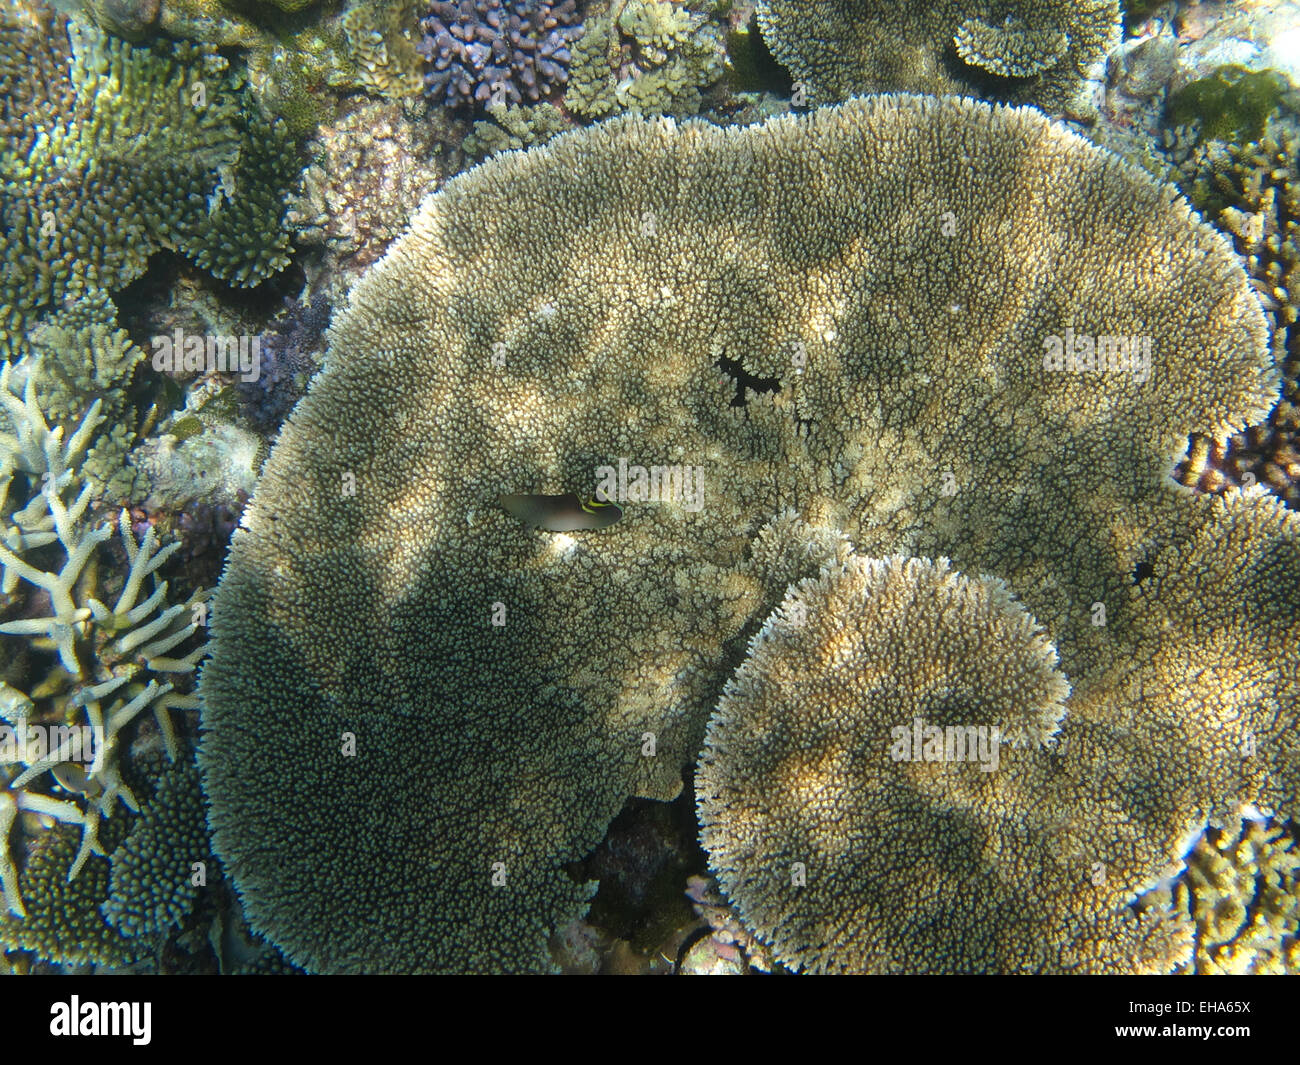 Leaf coral (Agaricia) and Porites coral on a reef in the Maldives Stock Photo